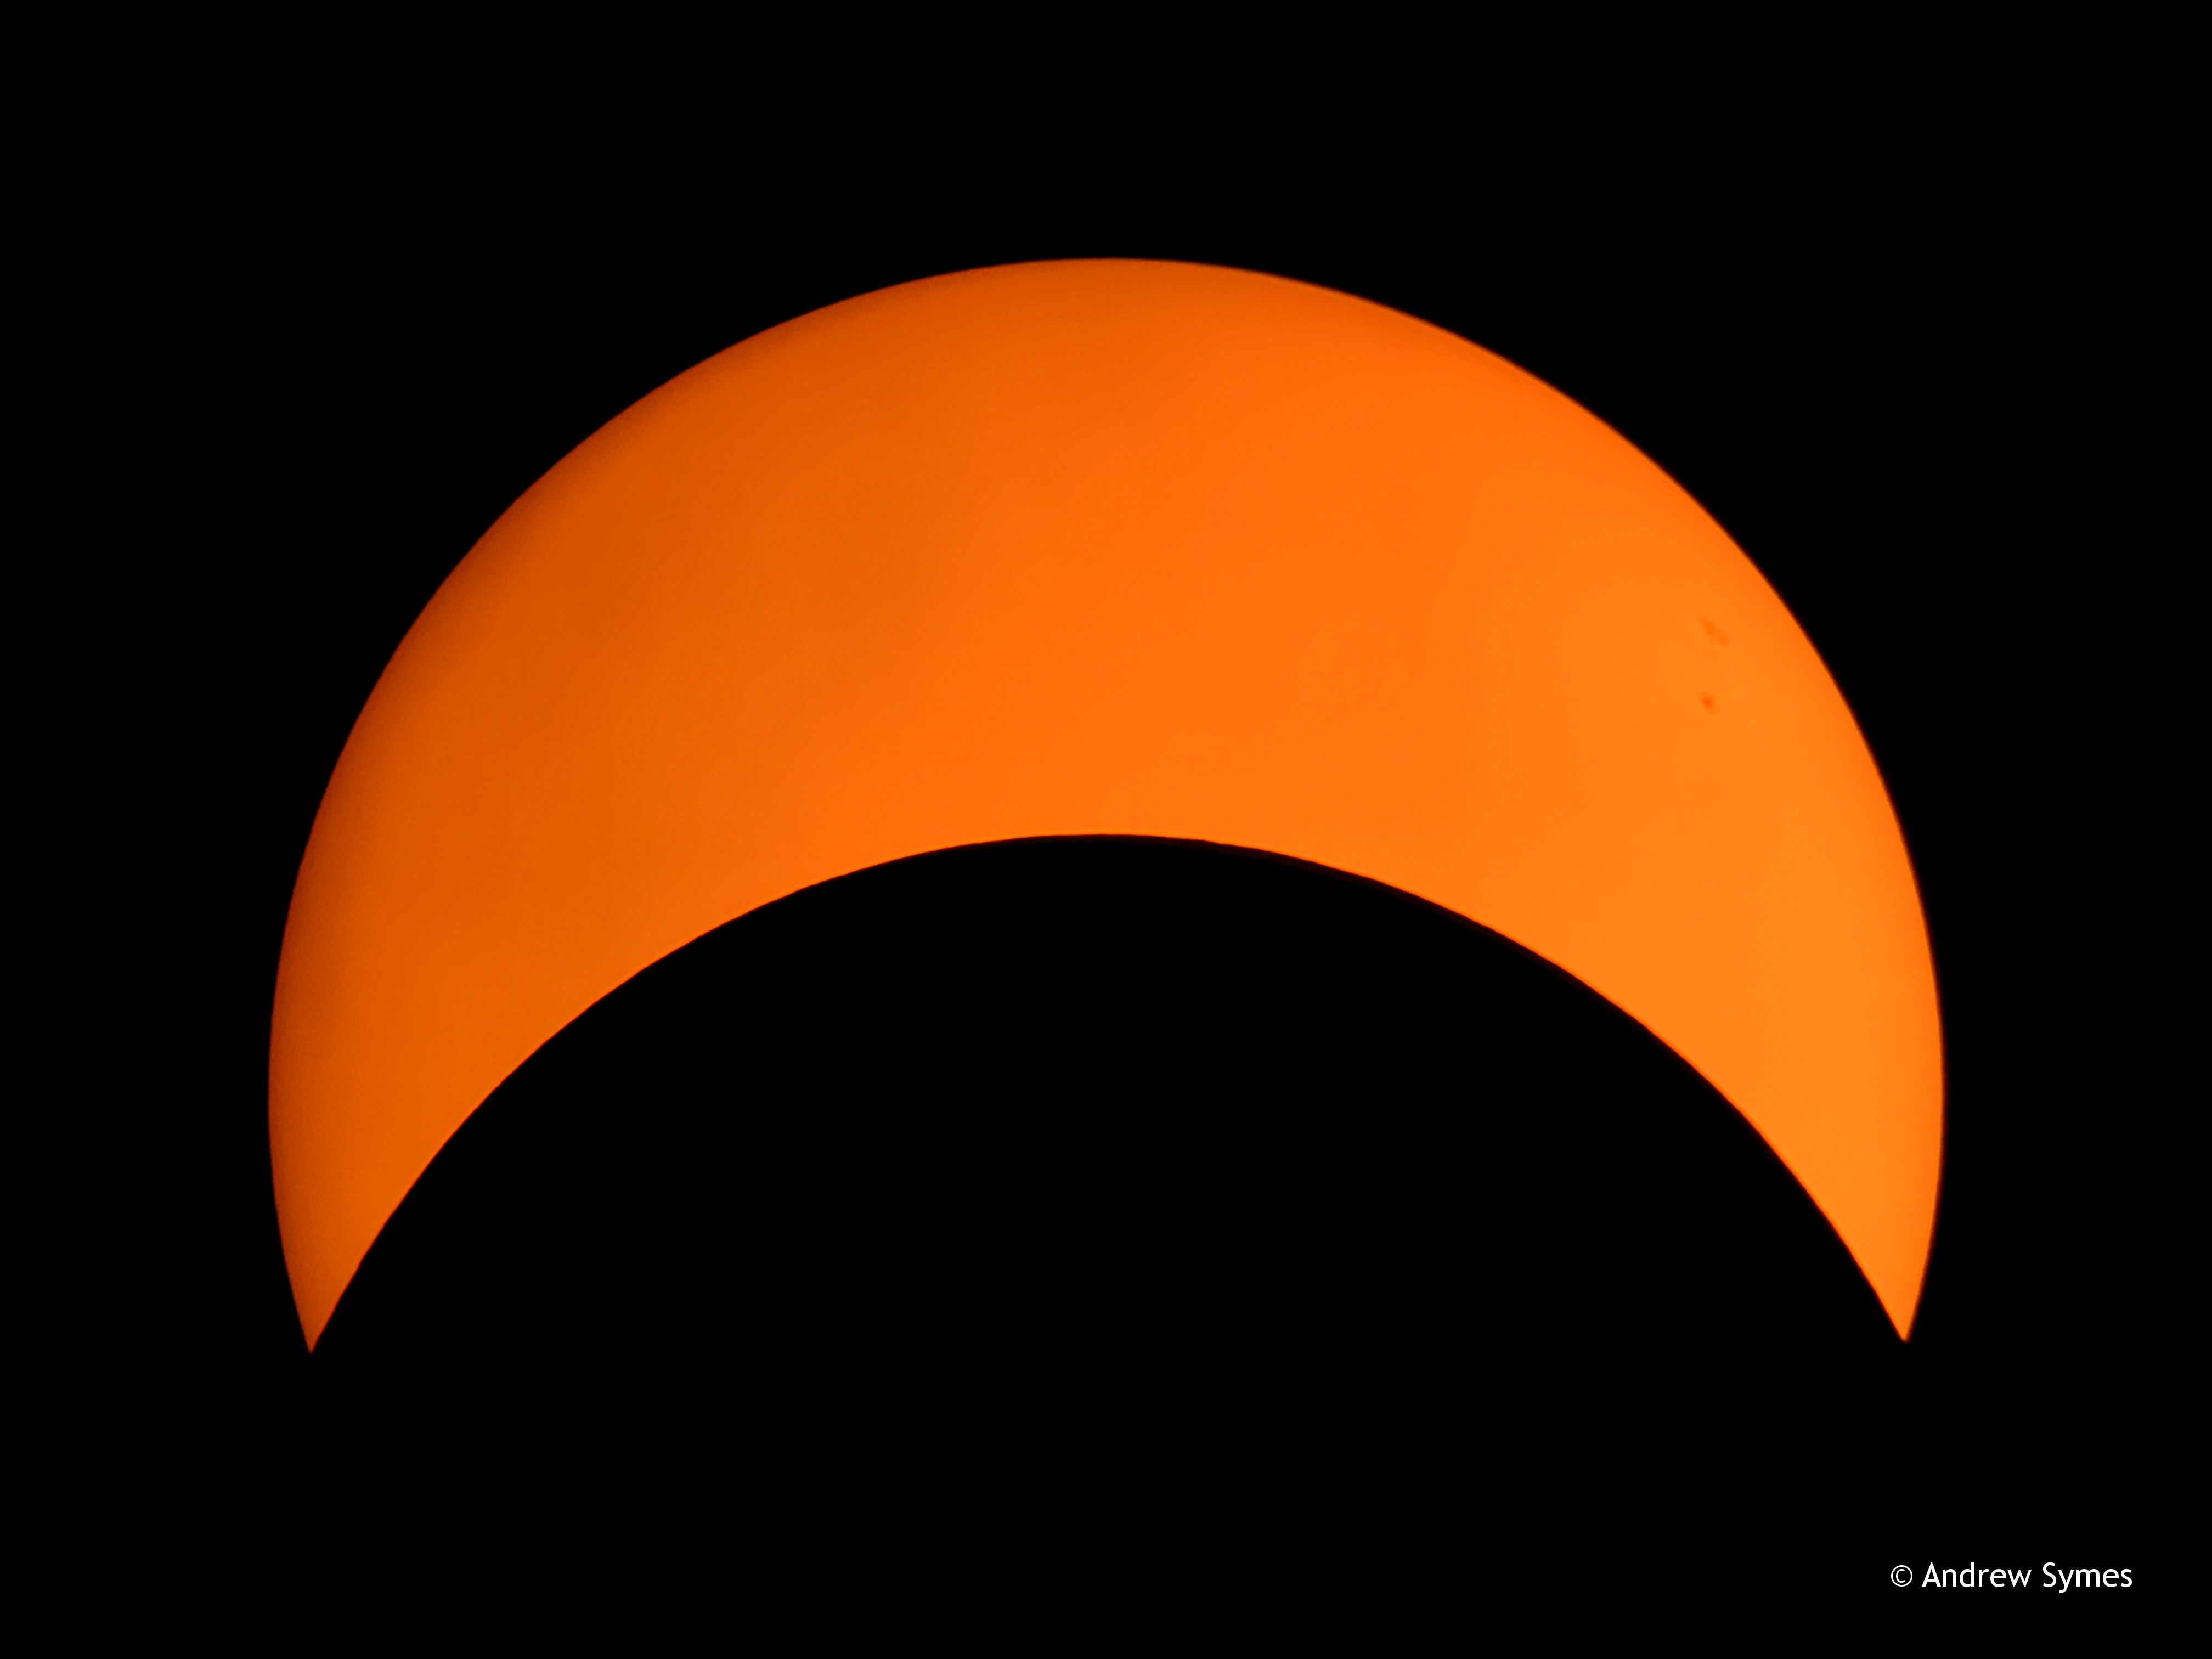 SolarEclipseSymes_225pm_Aug21_2017_RotatedCentered_Watermark.png